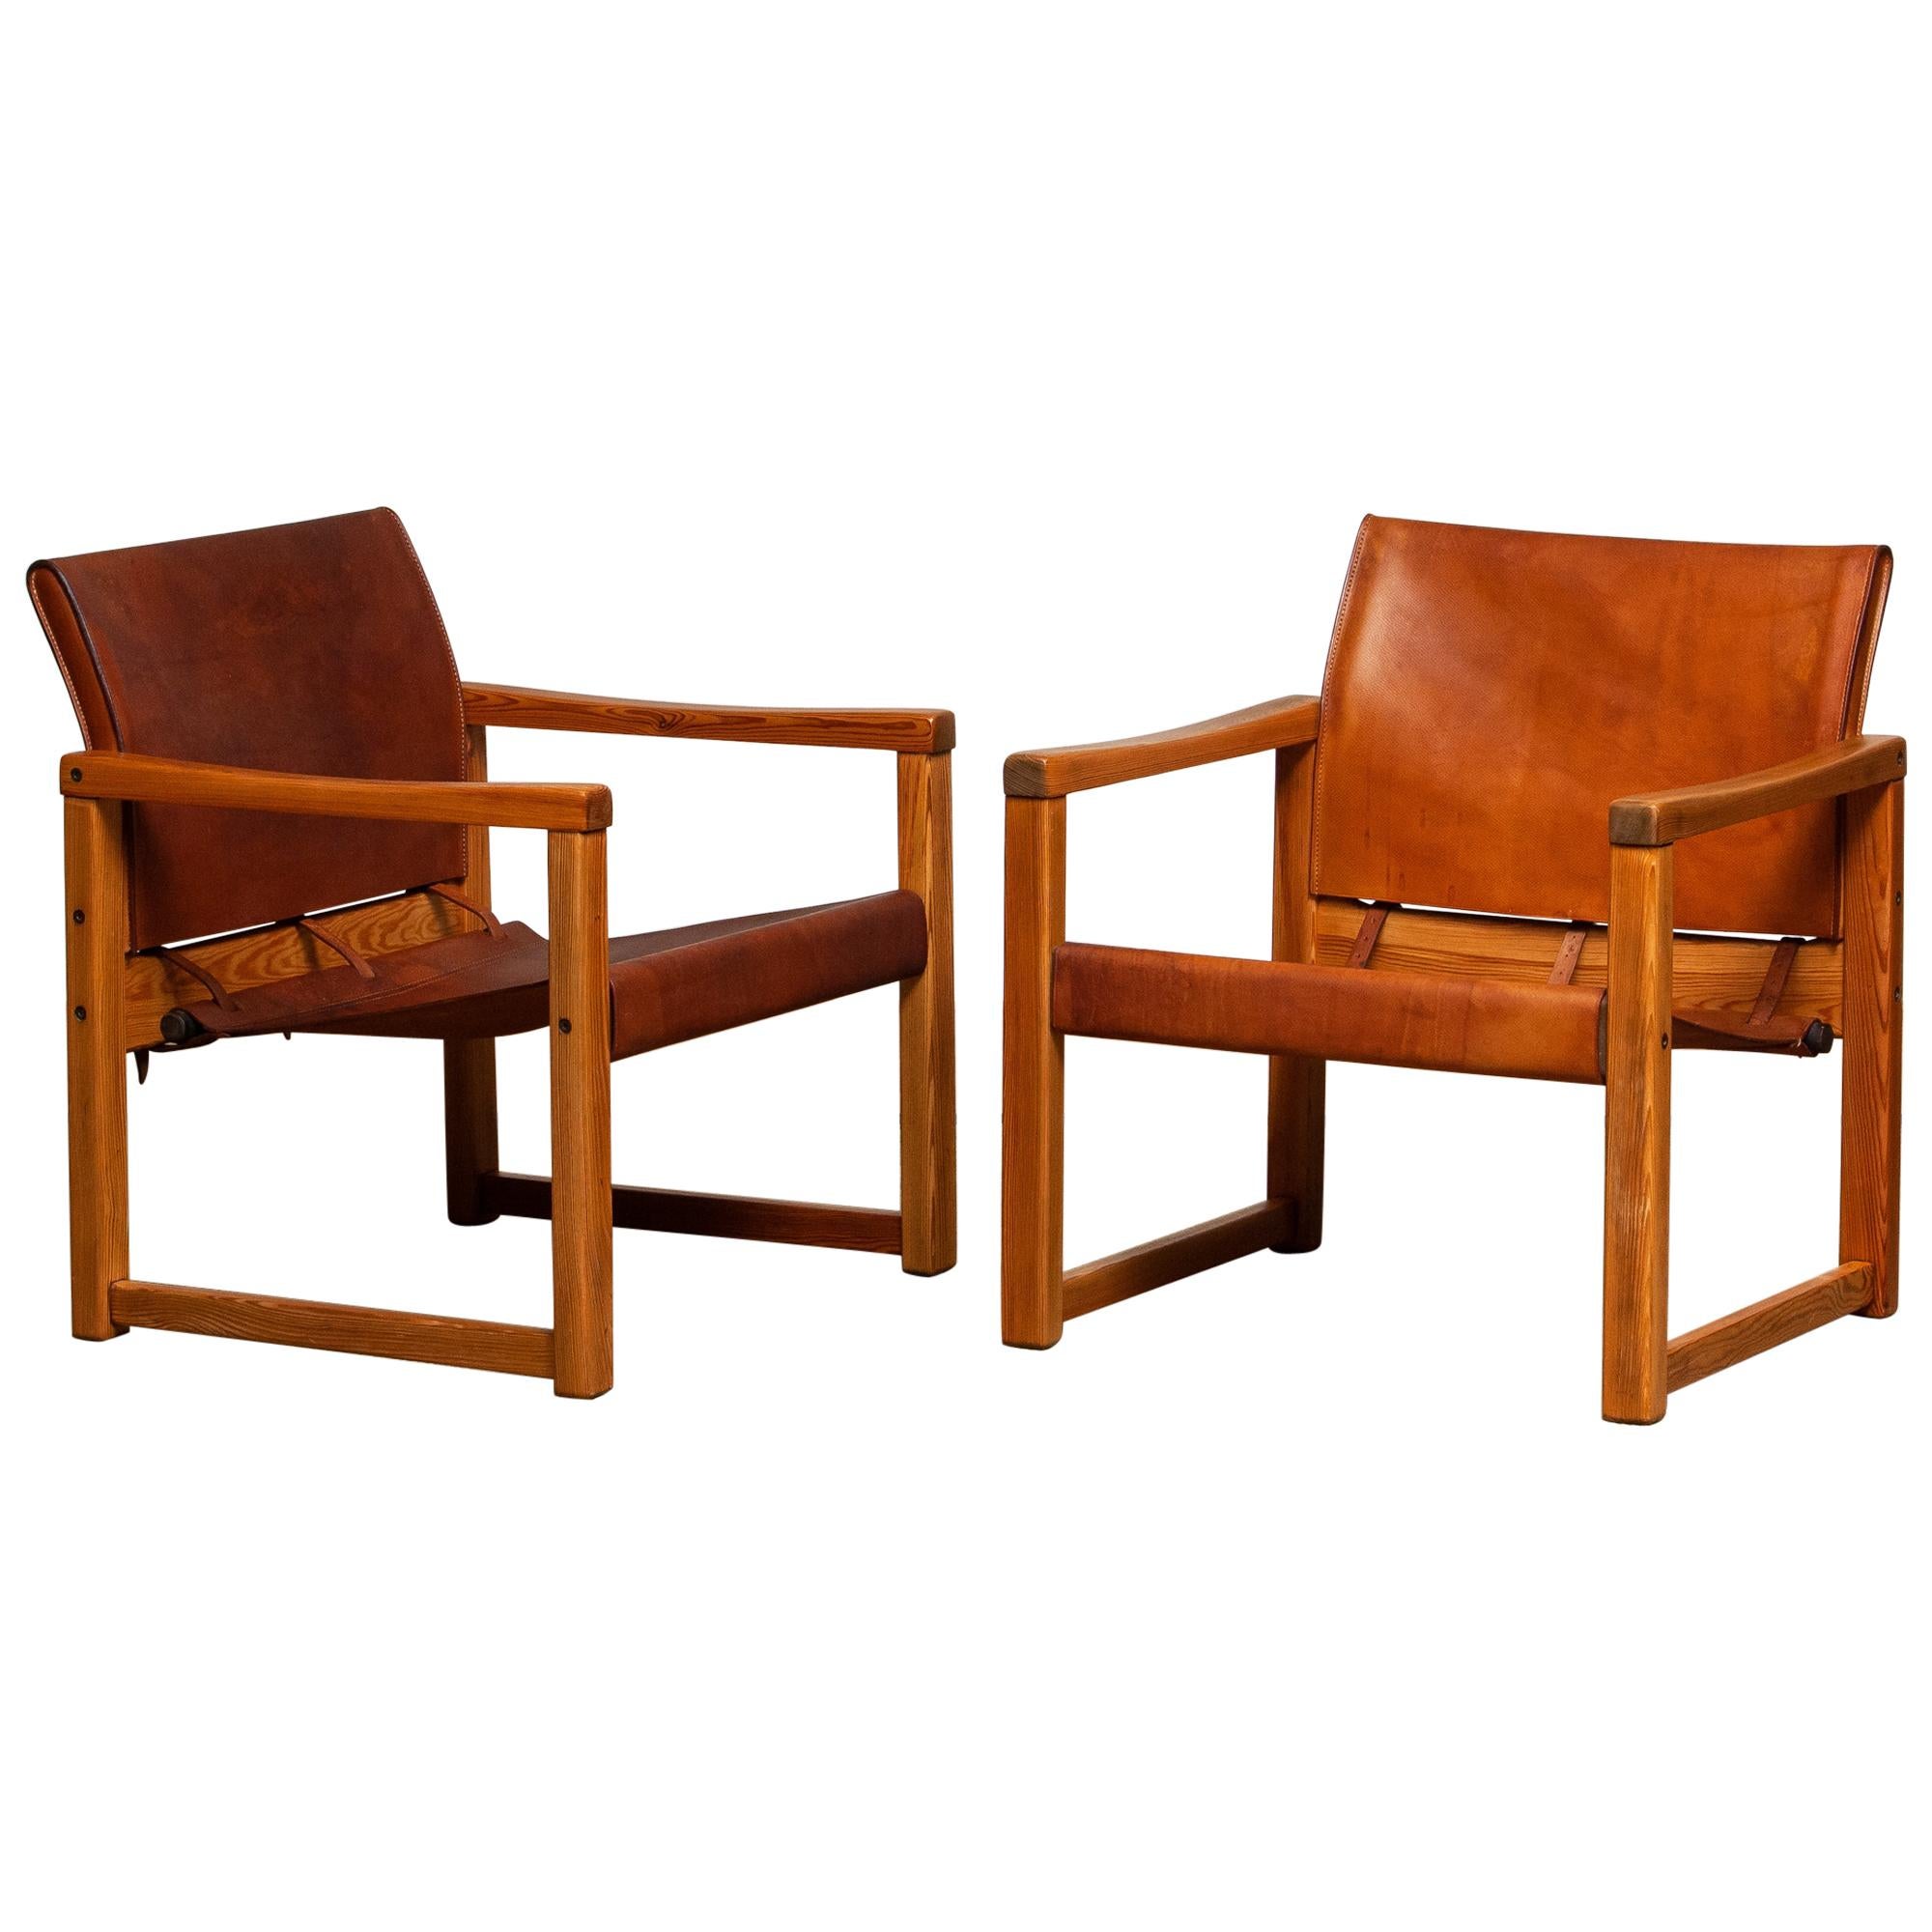 Beautiful set of two study cognac leather safari chairs (Model Diana) designed by Karin Mobring for Ikea, Sweden. The model is lounged in 1974.
The leather on both chairs is in good and smooth condition and also has a beautiful patina true the